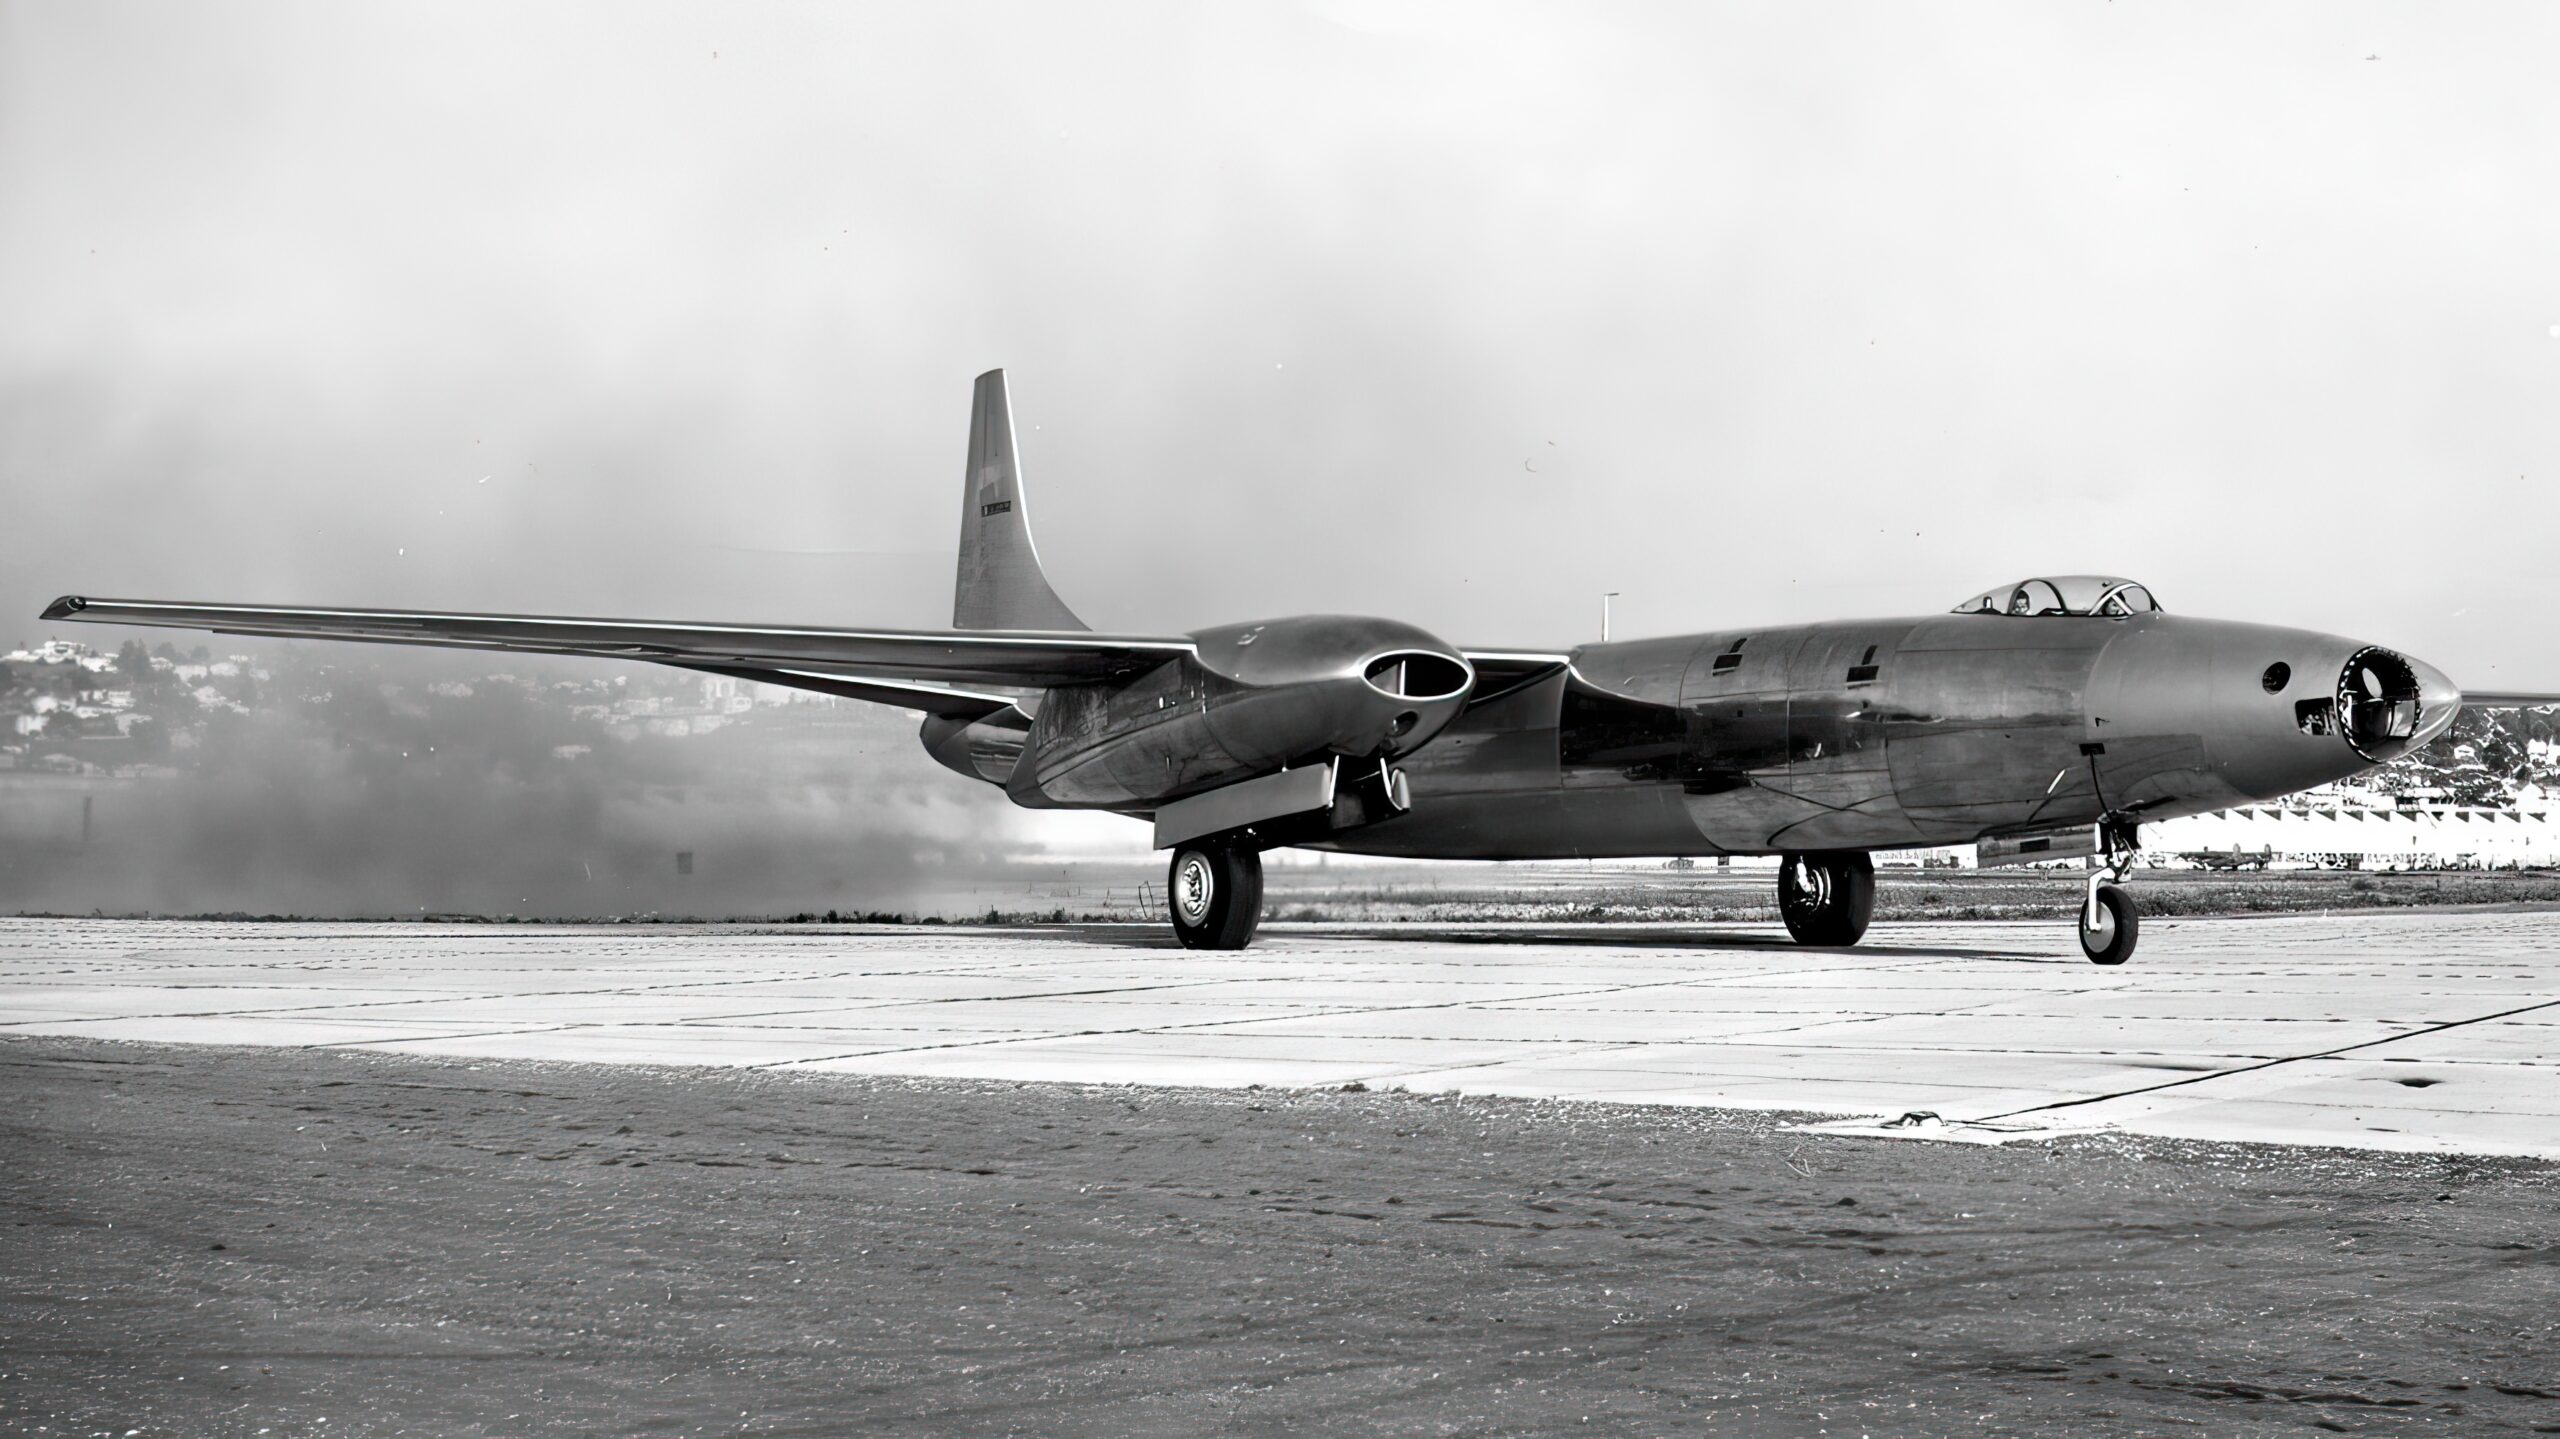 Convair XB-46 with engines running